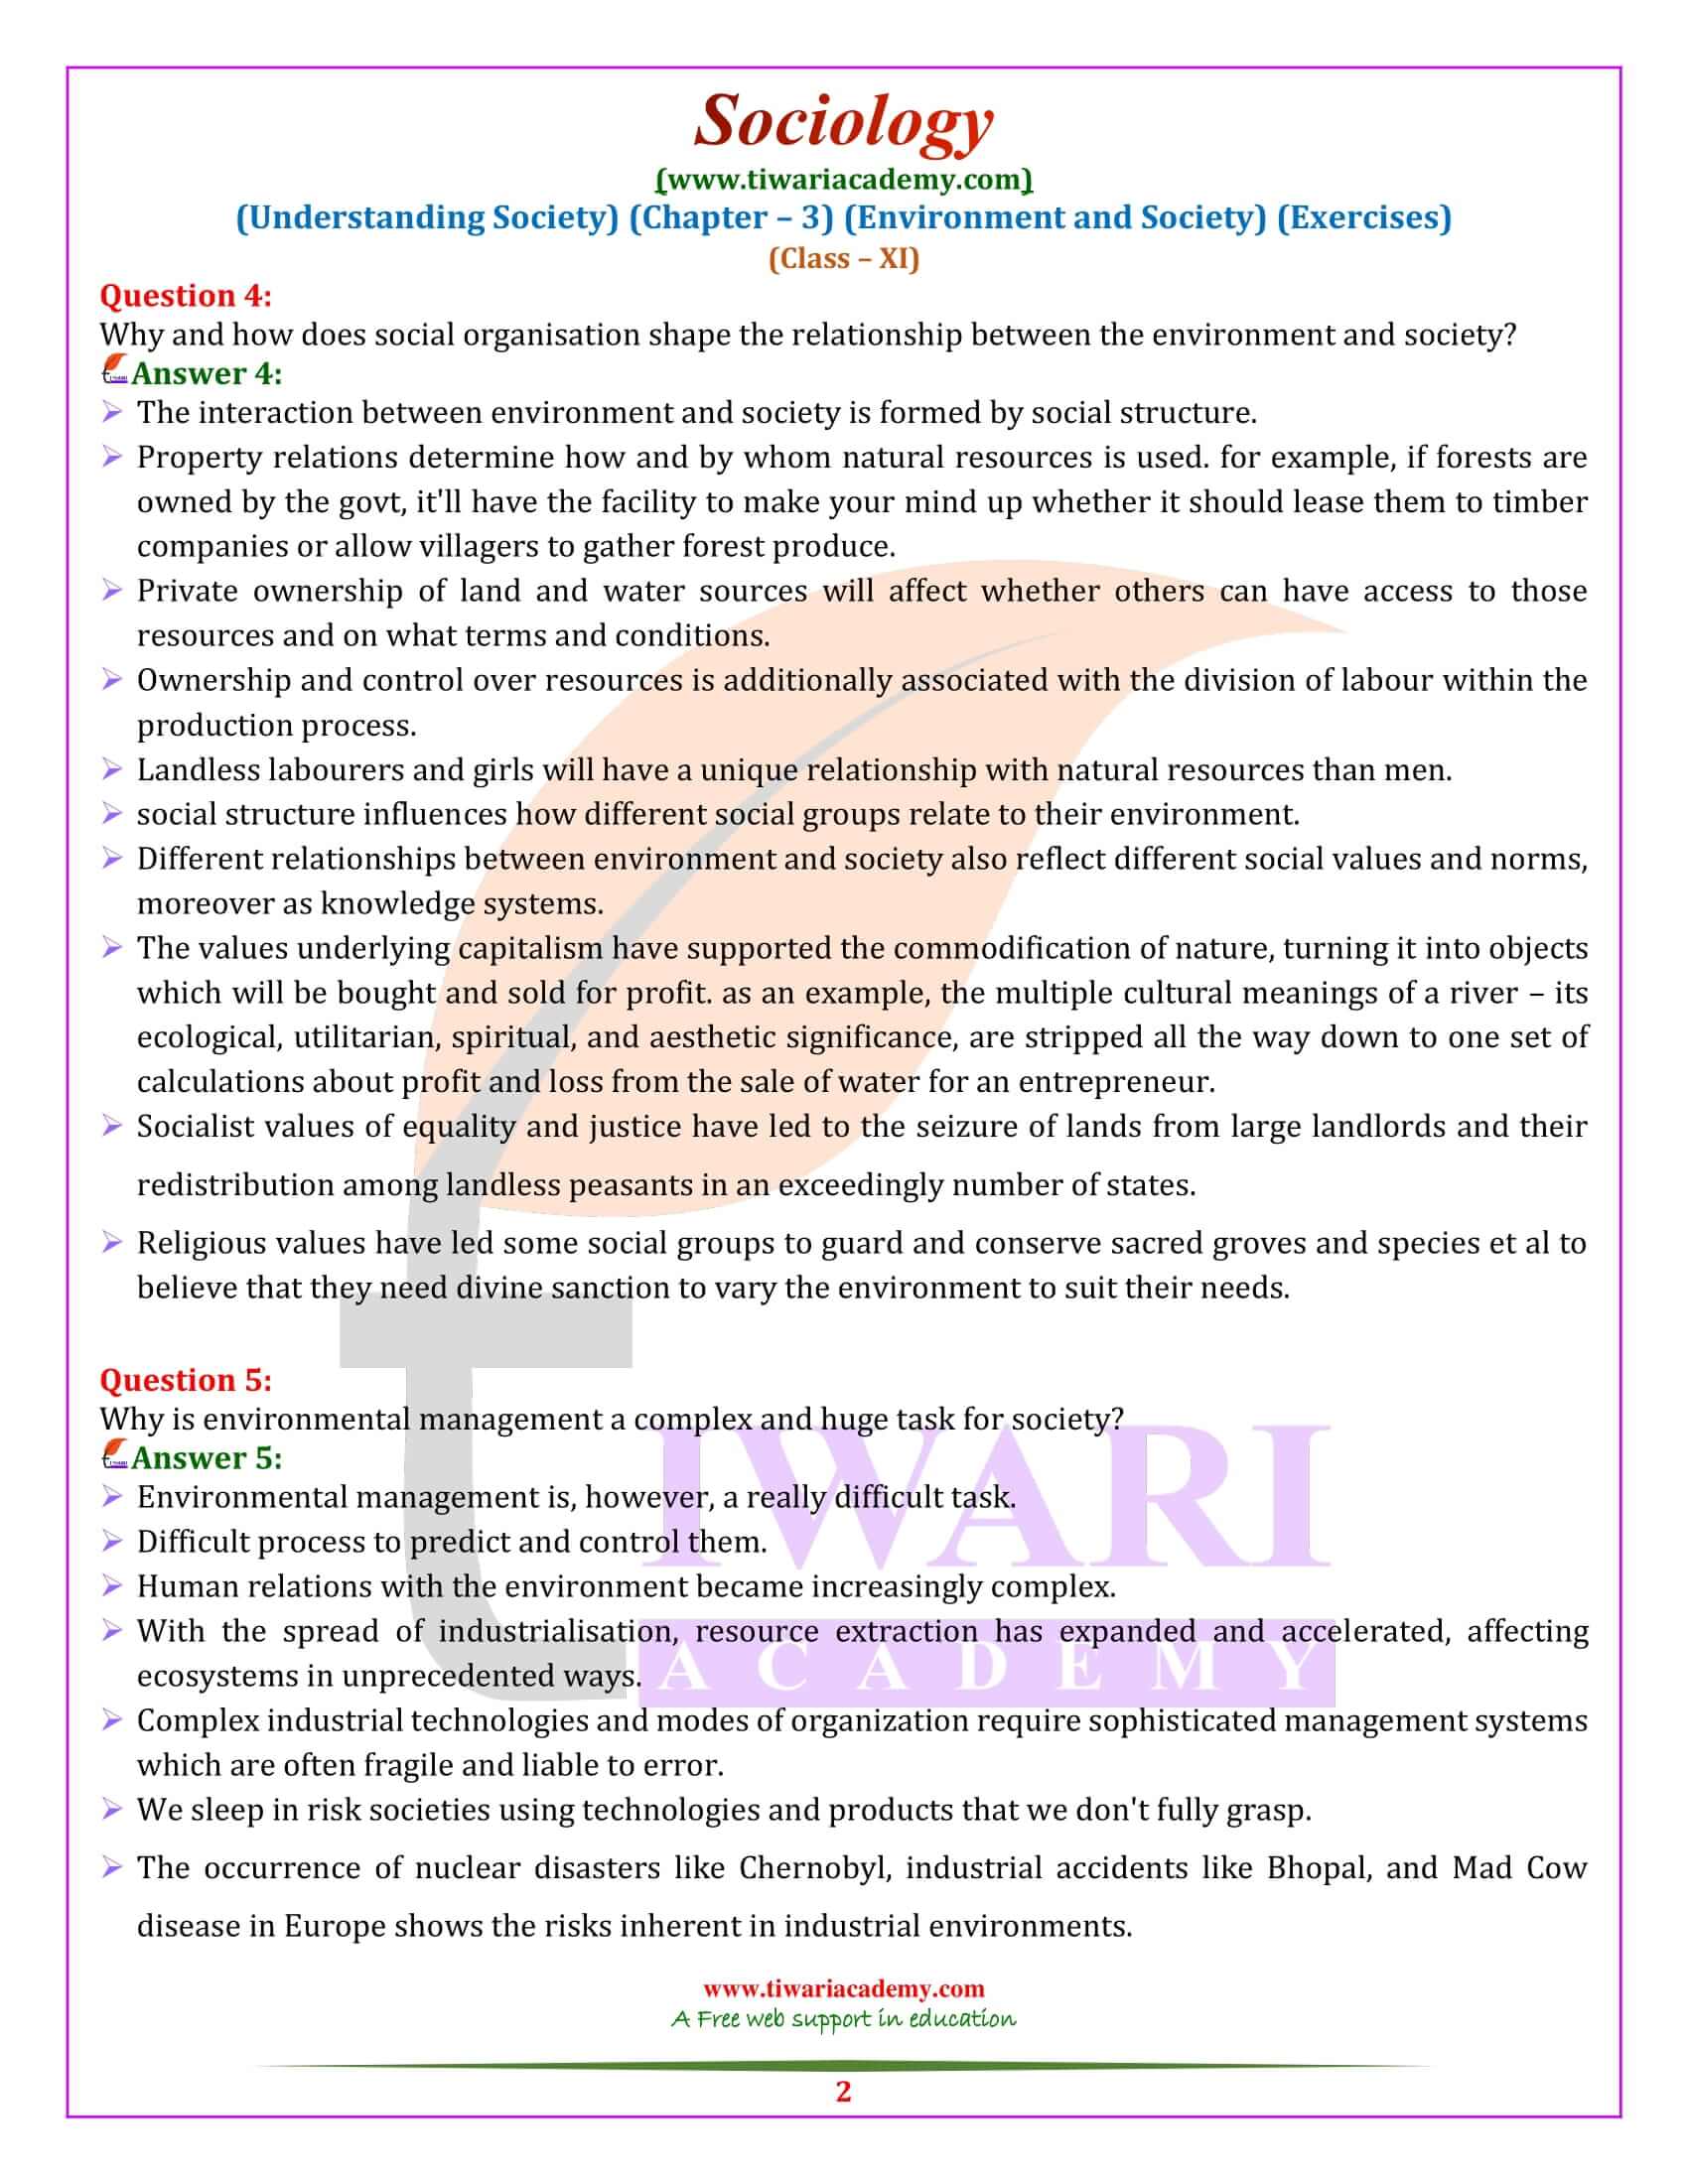 NCERT Solutions for Class 11 Sociology Chapter 3